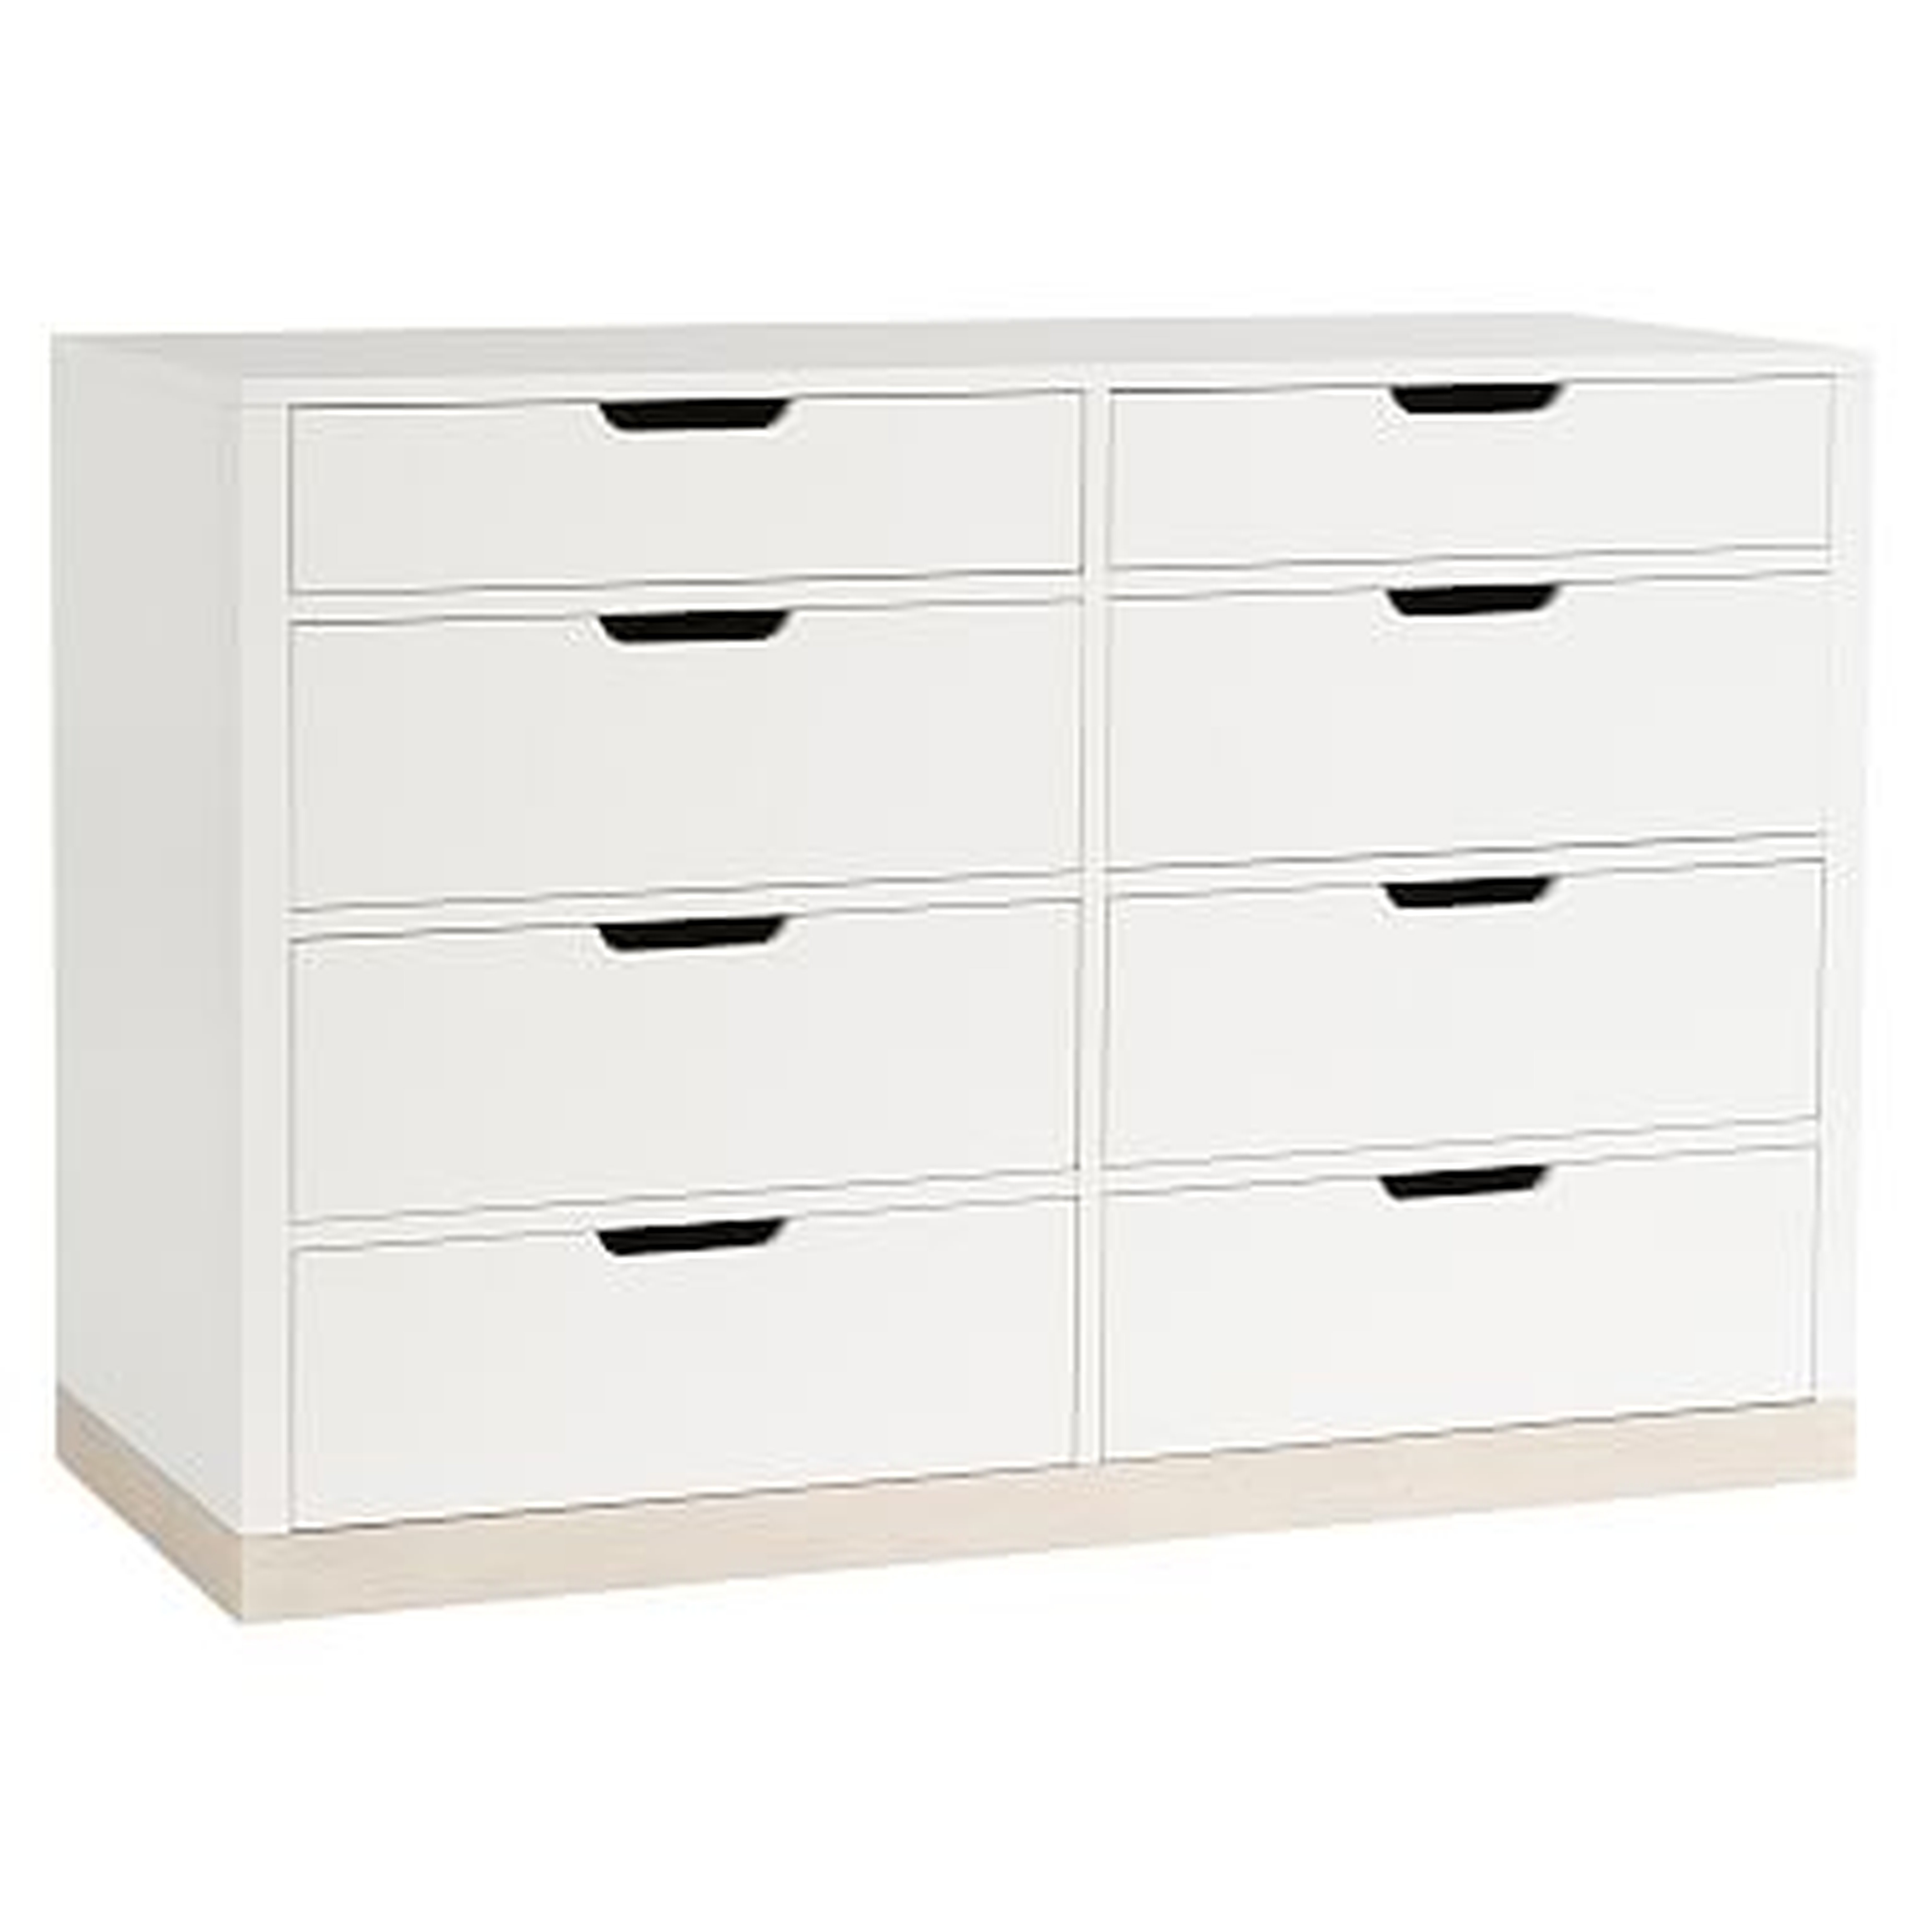 Rhys 8-Drawer Wide Dresser, Weathered White/Simply White - Pottery Barn Teen